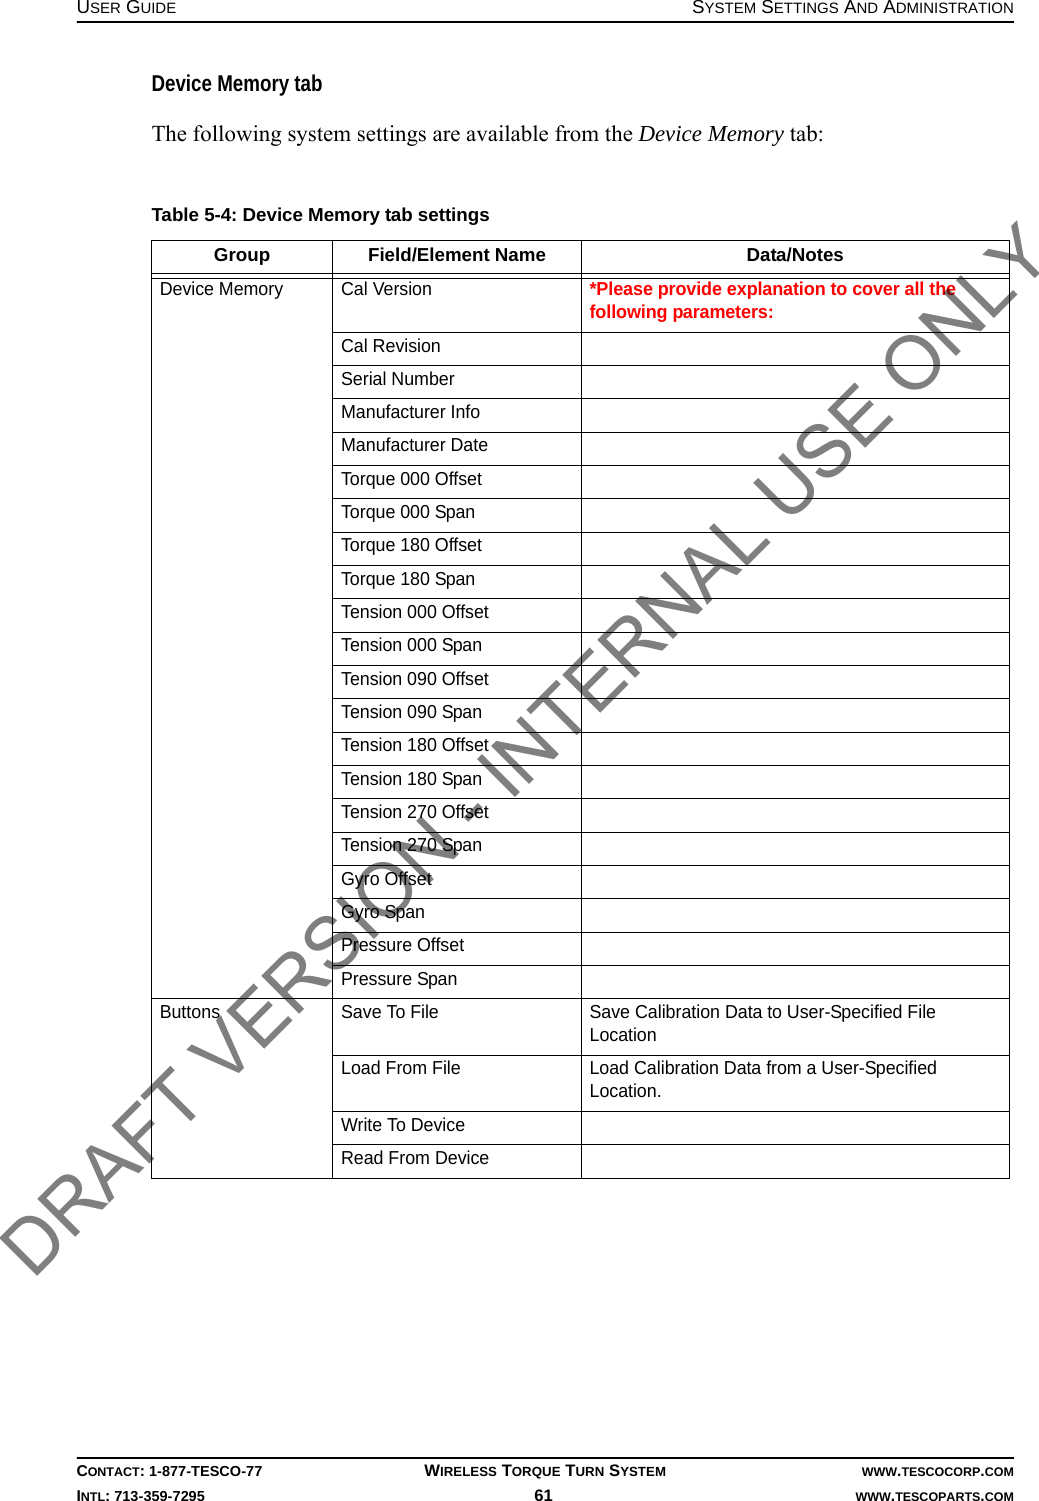 USER GUIDE SYSTEM SETTINGS AND ADMINISTRATIONCONTACT: 1-877-TESCO-77 WIRELESS TORQUE TURN SYSTEM WWW.TESCOCORP.COMINTL: 713-359-7295 61    WWW.TESCOPARTS.COMDevice Memory tabThe following system settings are available from the Device Memory tab:Table 5-4: Device Memory tab settingsGroup Field/Element Name Data/NotesDevice Memory Cal Version*Please provide explanation to cover all the following parameters:Cal RevisionSerial NumberManufacturer InfoManufacturer DateTorque 000 OffsetTorque 000 SpanTorque 180 OffsetTorque 180 SpanTension 000 OffsetTension 000 SpanTension 090 OffsetTension 090 SpanTension 180 OffsetTension 180 SpanTension 270 OffsetTension 270 SpanGyro OffsetGyro SpanPressure OffsetPressure SpanButtons Save To File Save Calibration Data to User-Specified File LocationLoad From File Load Calibration Data from a User-Specified Location.Write To DeviceRead From DeviceDRAFT VERSION - INTERNAL USE ONLY